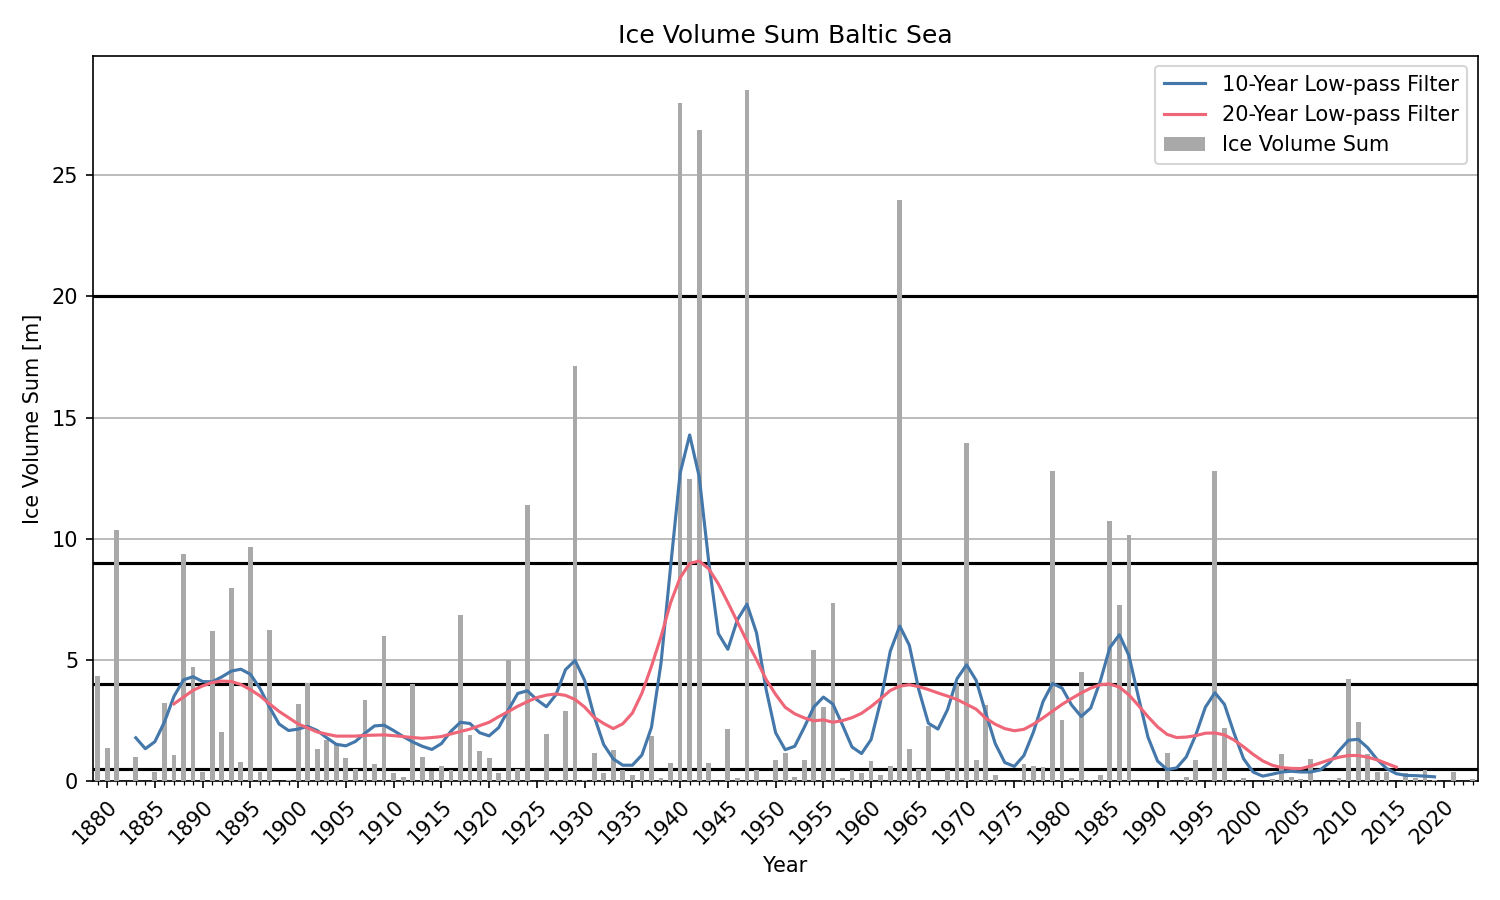 Time series of ice volume sum from 1879 for the Baltic Sea.